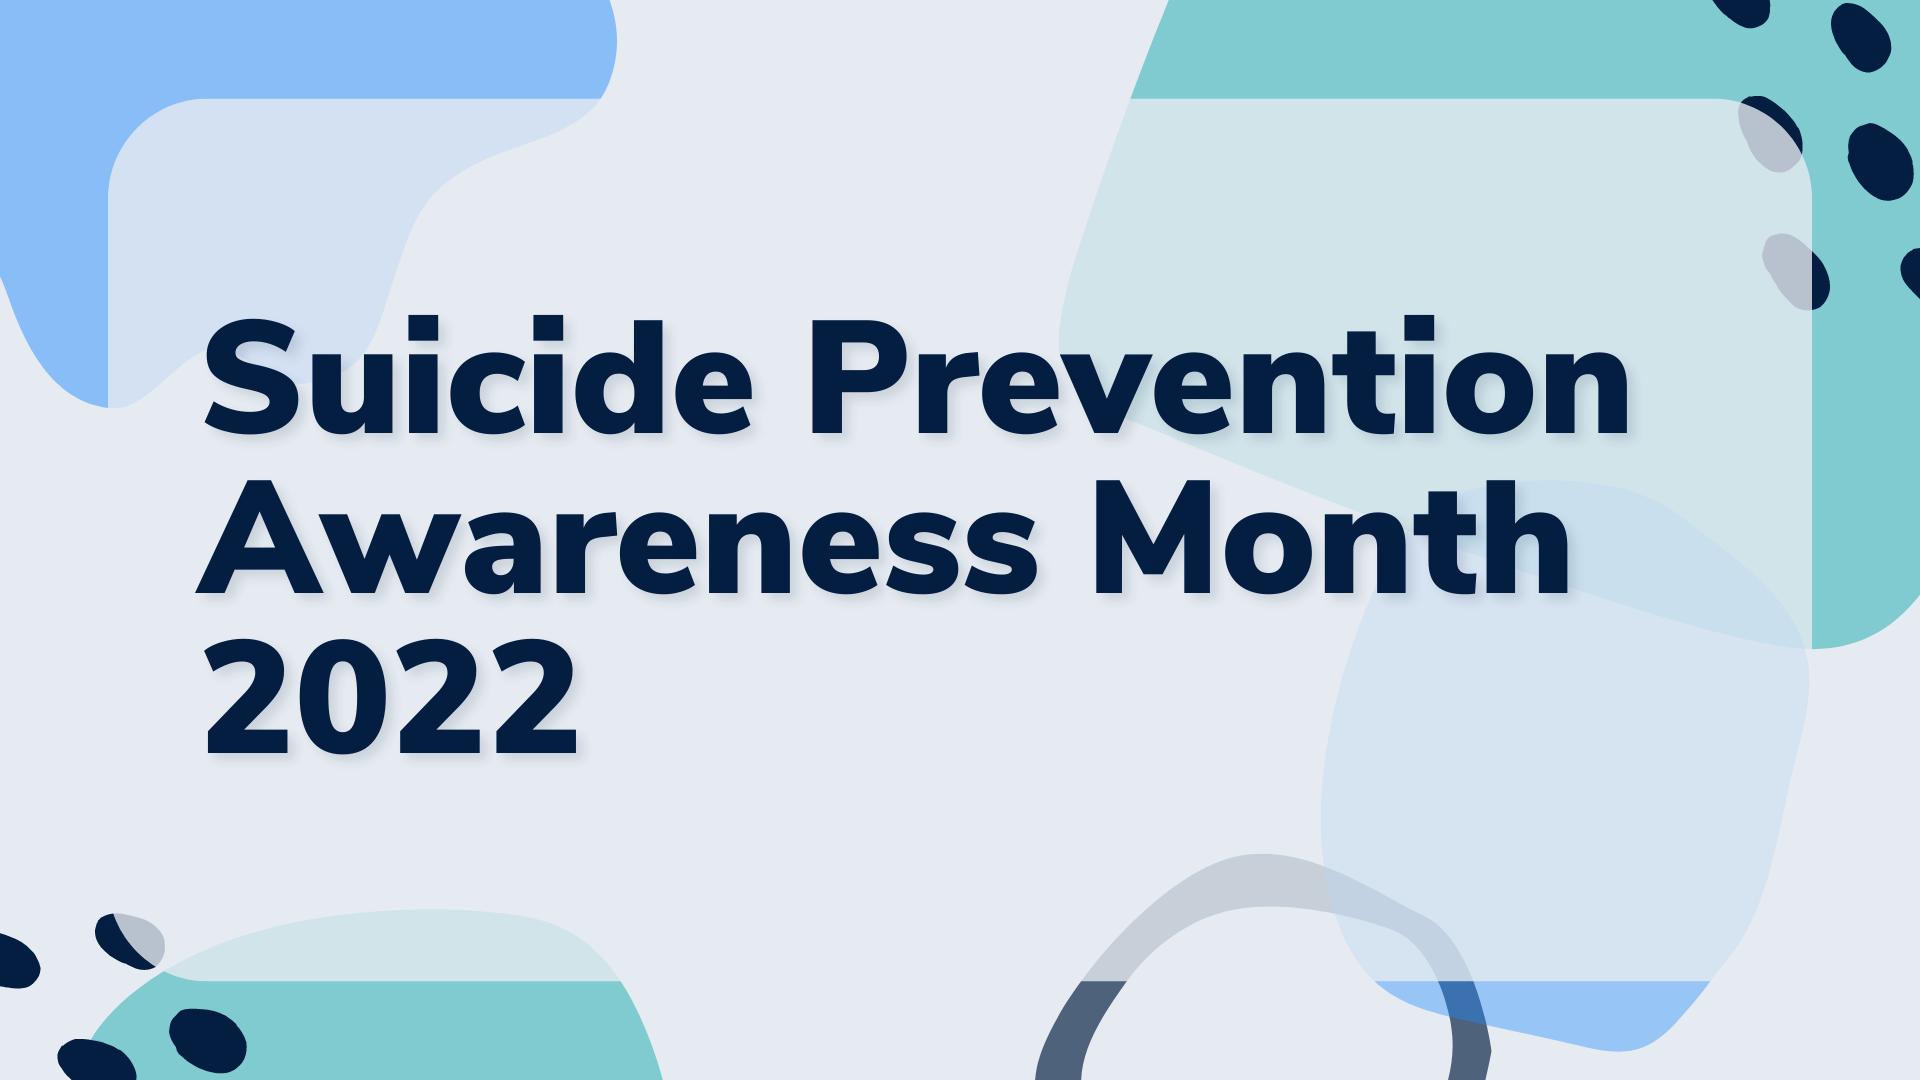 Suicide Prevention Awareness Month 2022